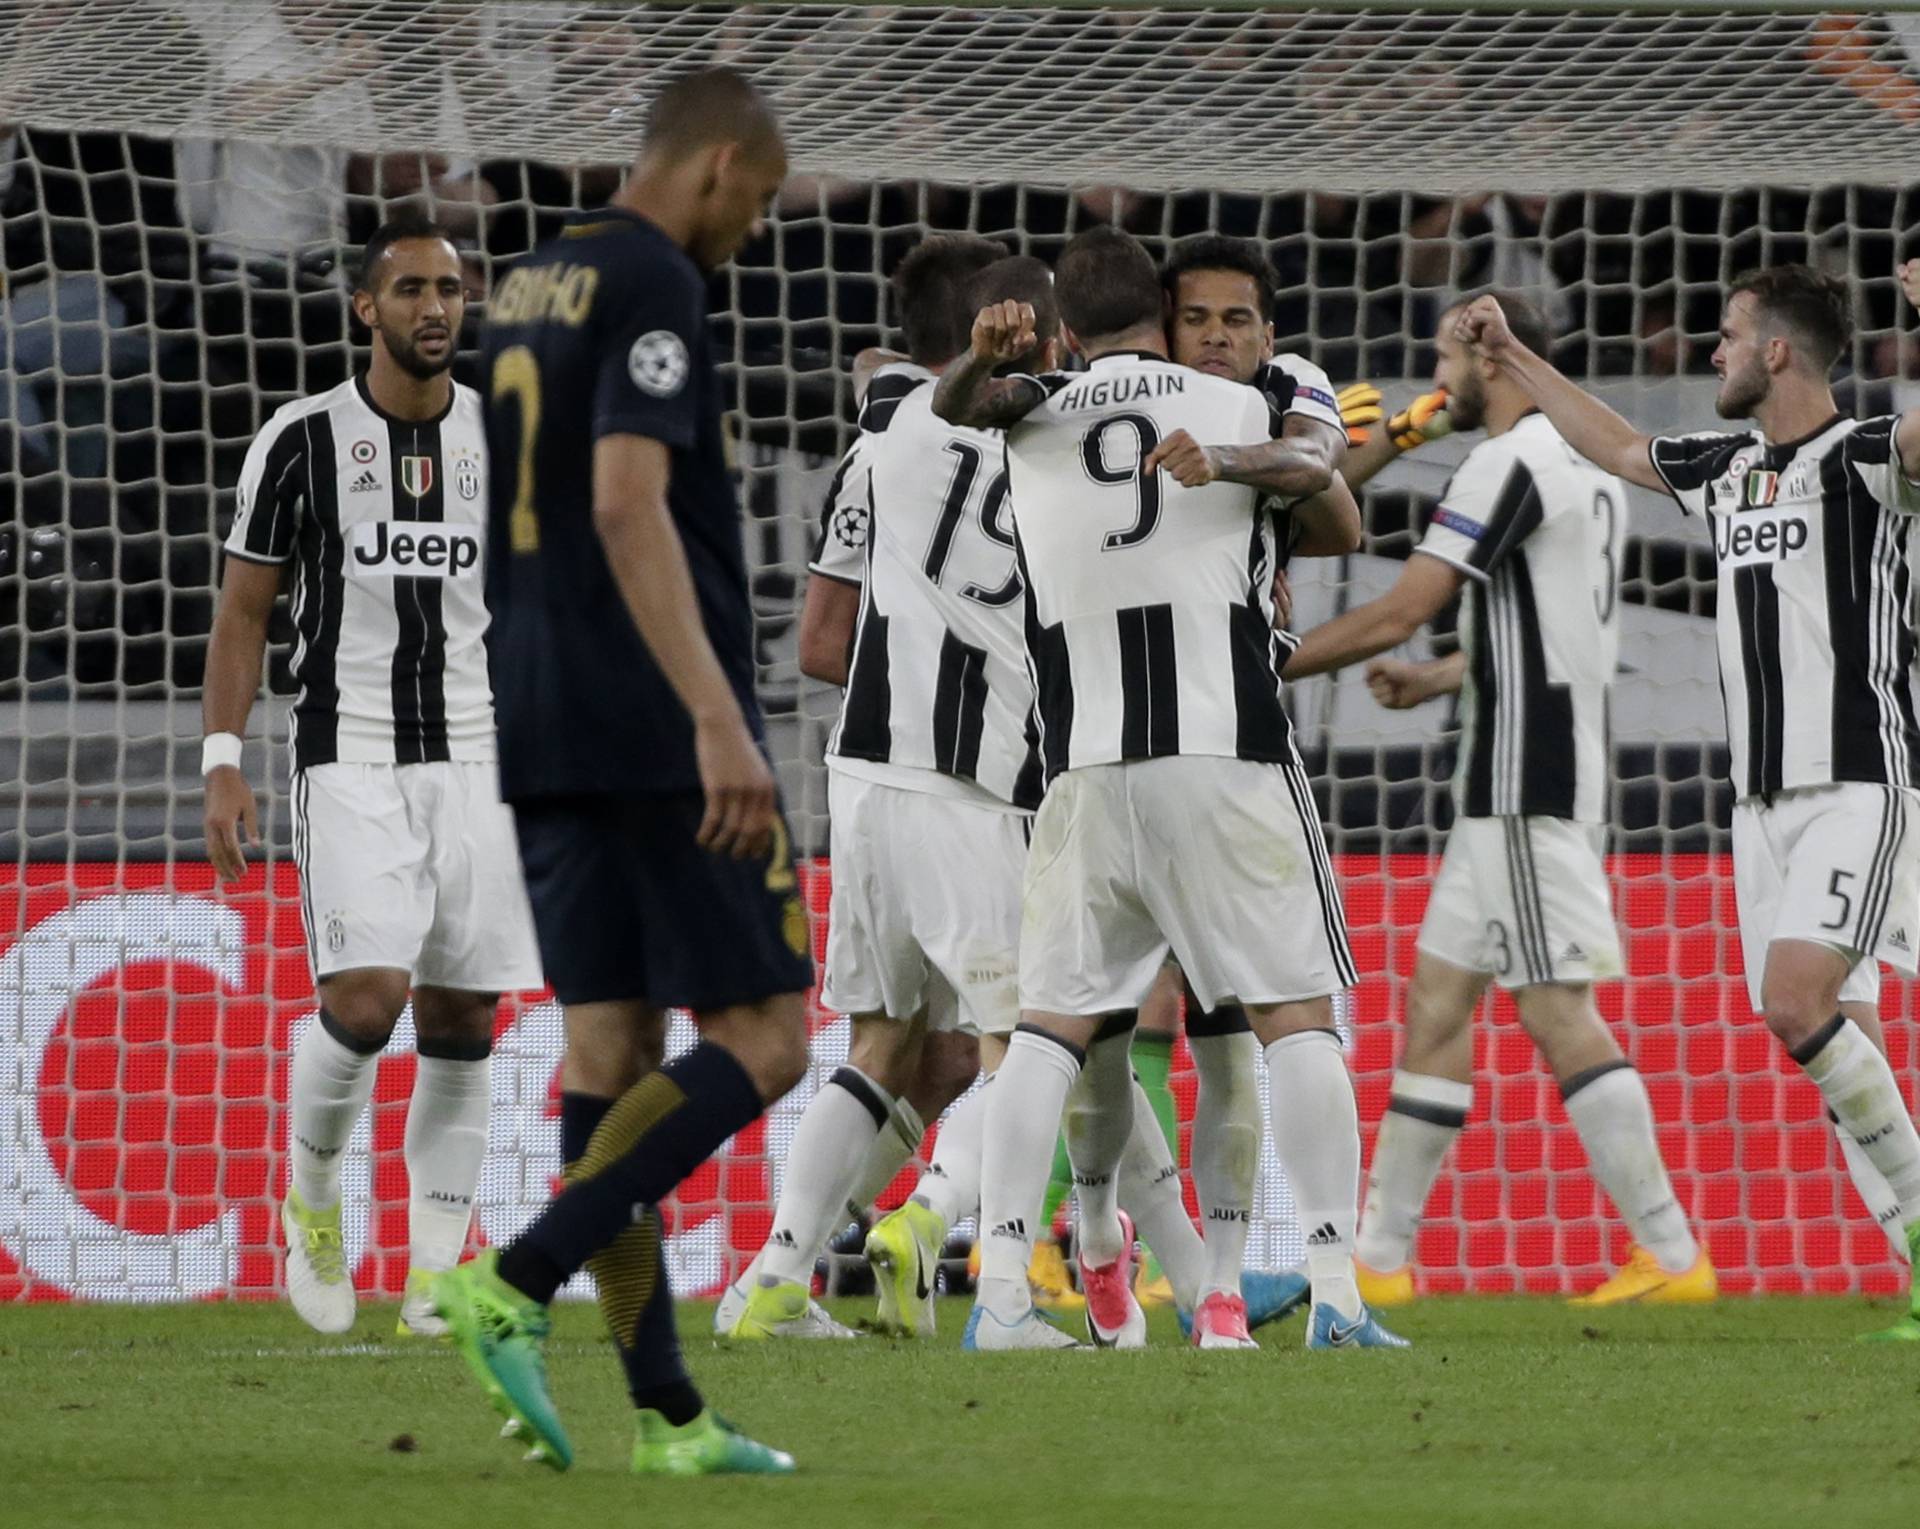 Juventus' Gonzalo Higuain and Dani Alves celebrate after the match